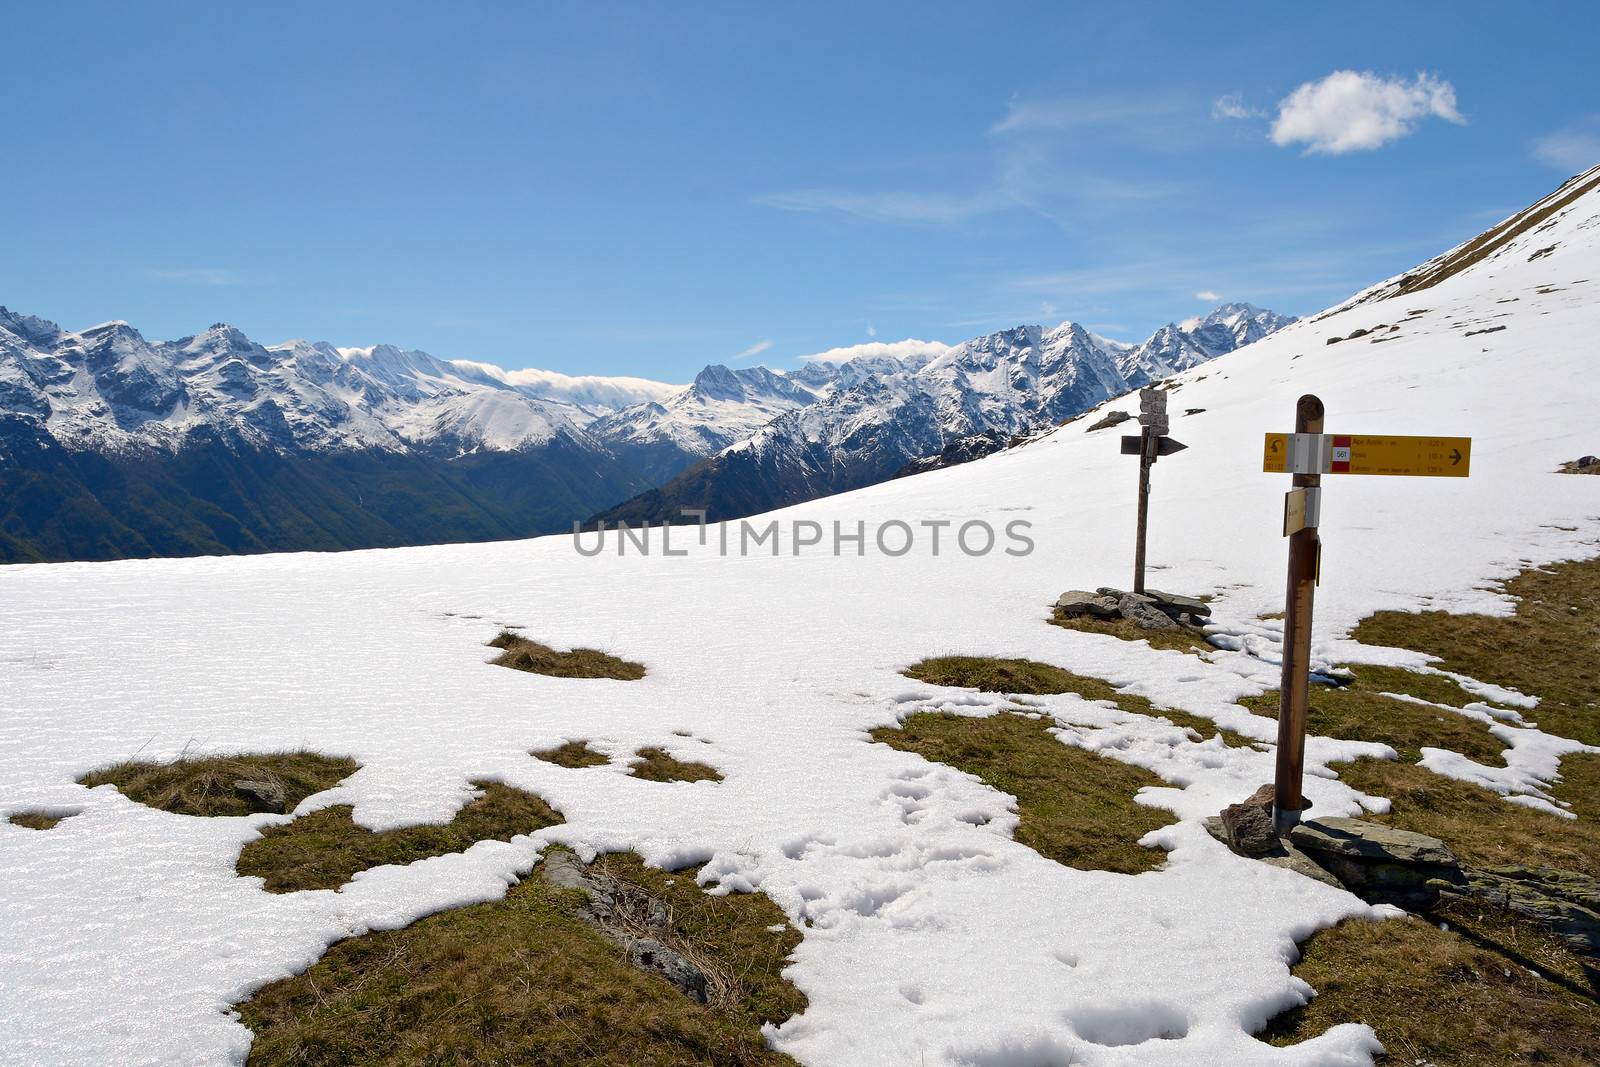 Footpath's signposts in scenic high mountain landscape, italian Alps